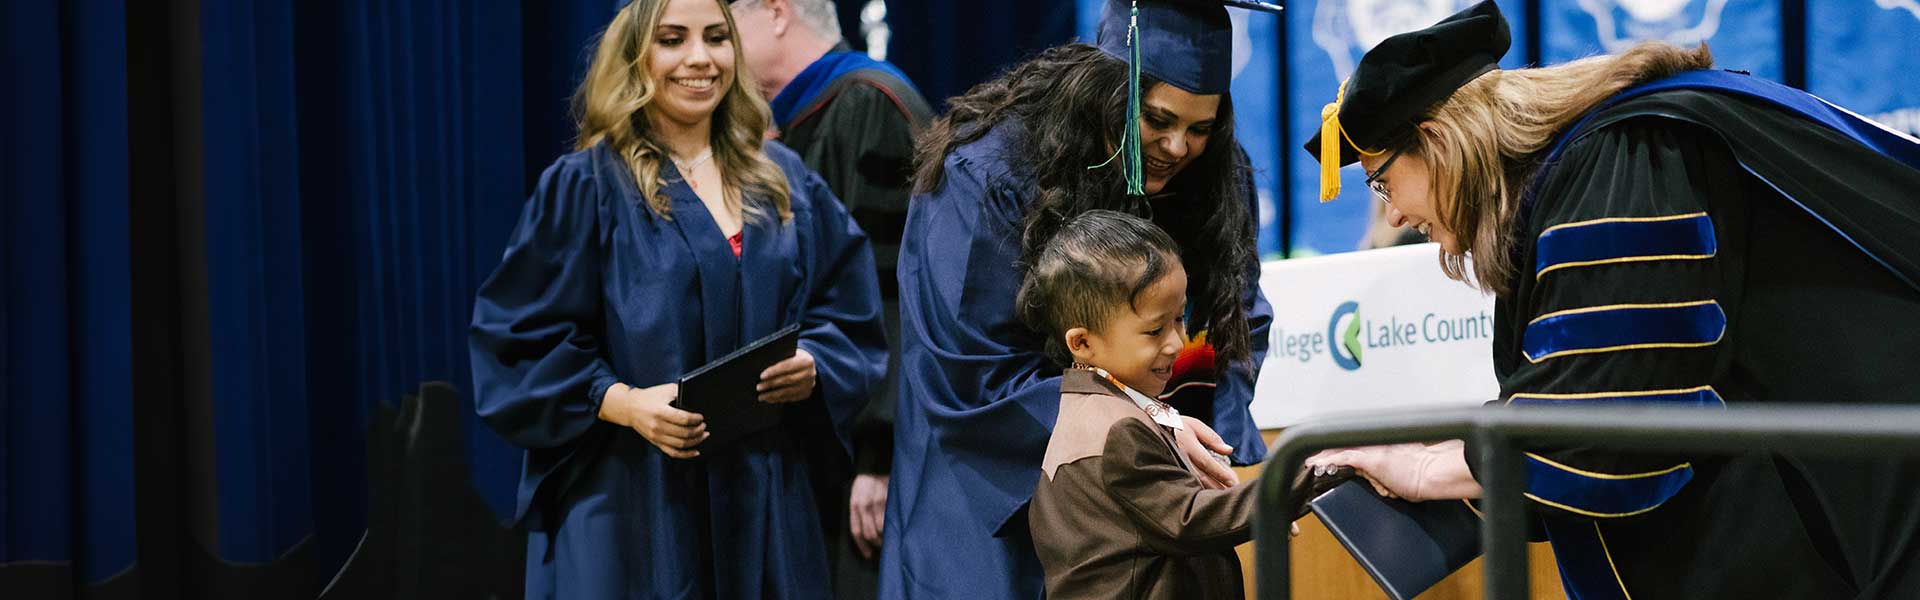 Dr. Lori Suddick shaking a young boy's hand at commencement